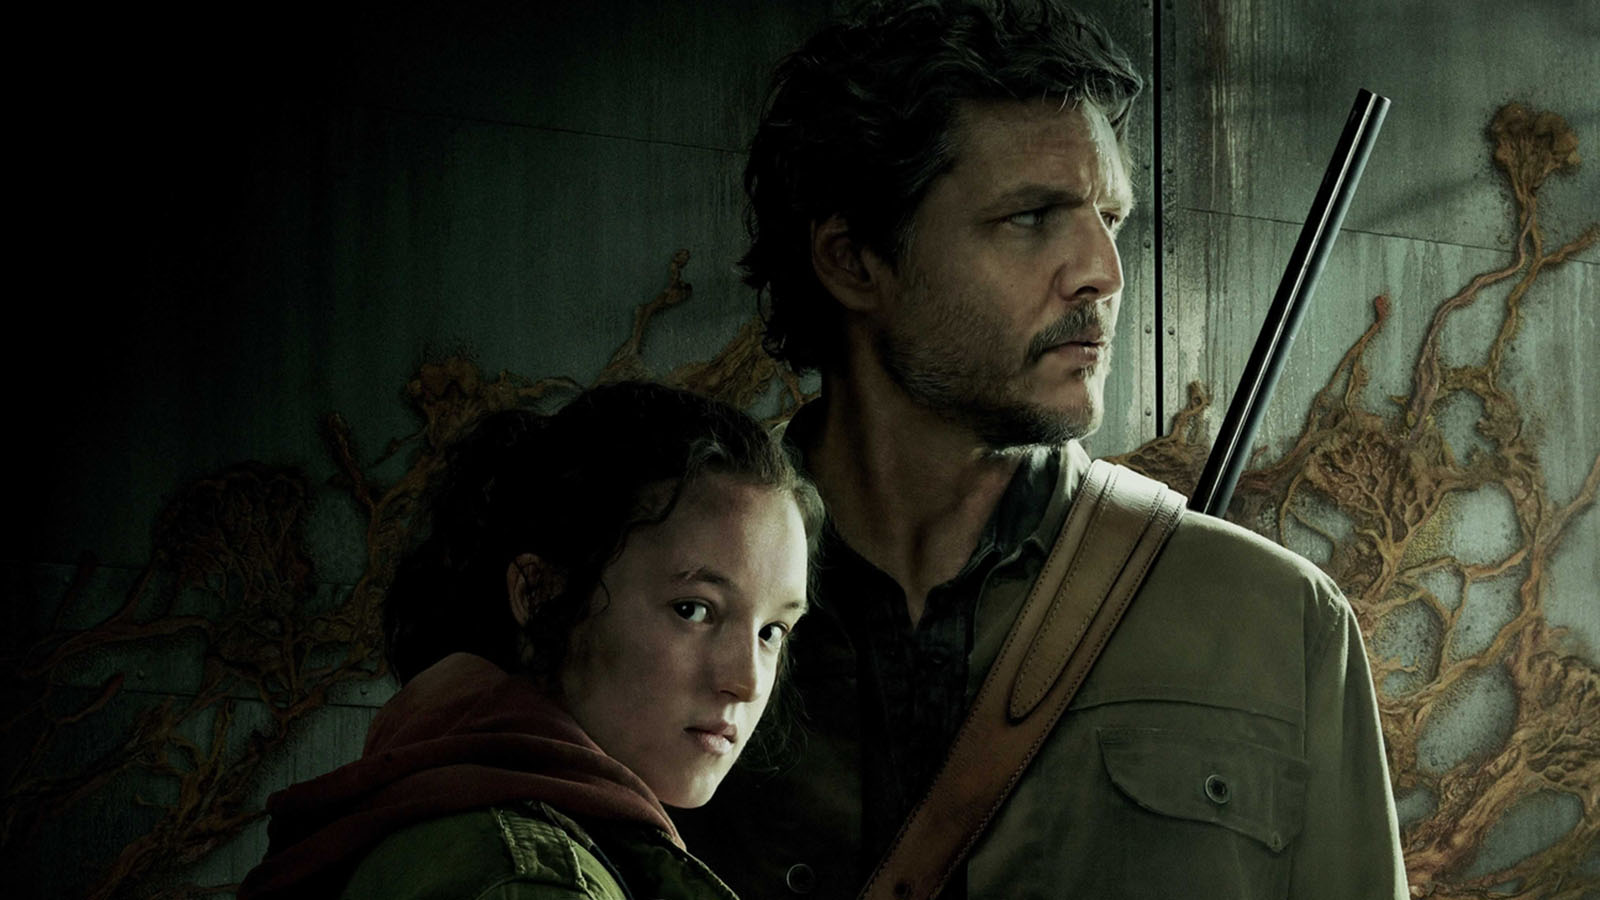 Joel is tasked with escorting Ellie, an immune teenager, across a post-apocalyptic United States. Image © HBO